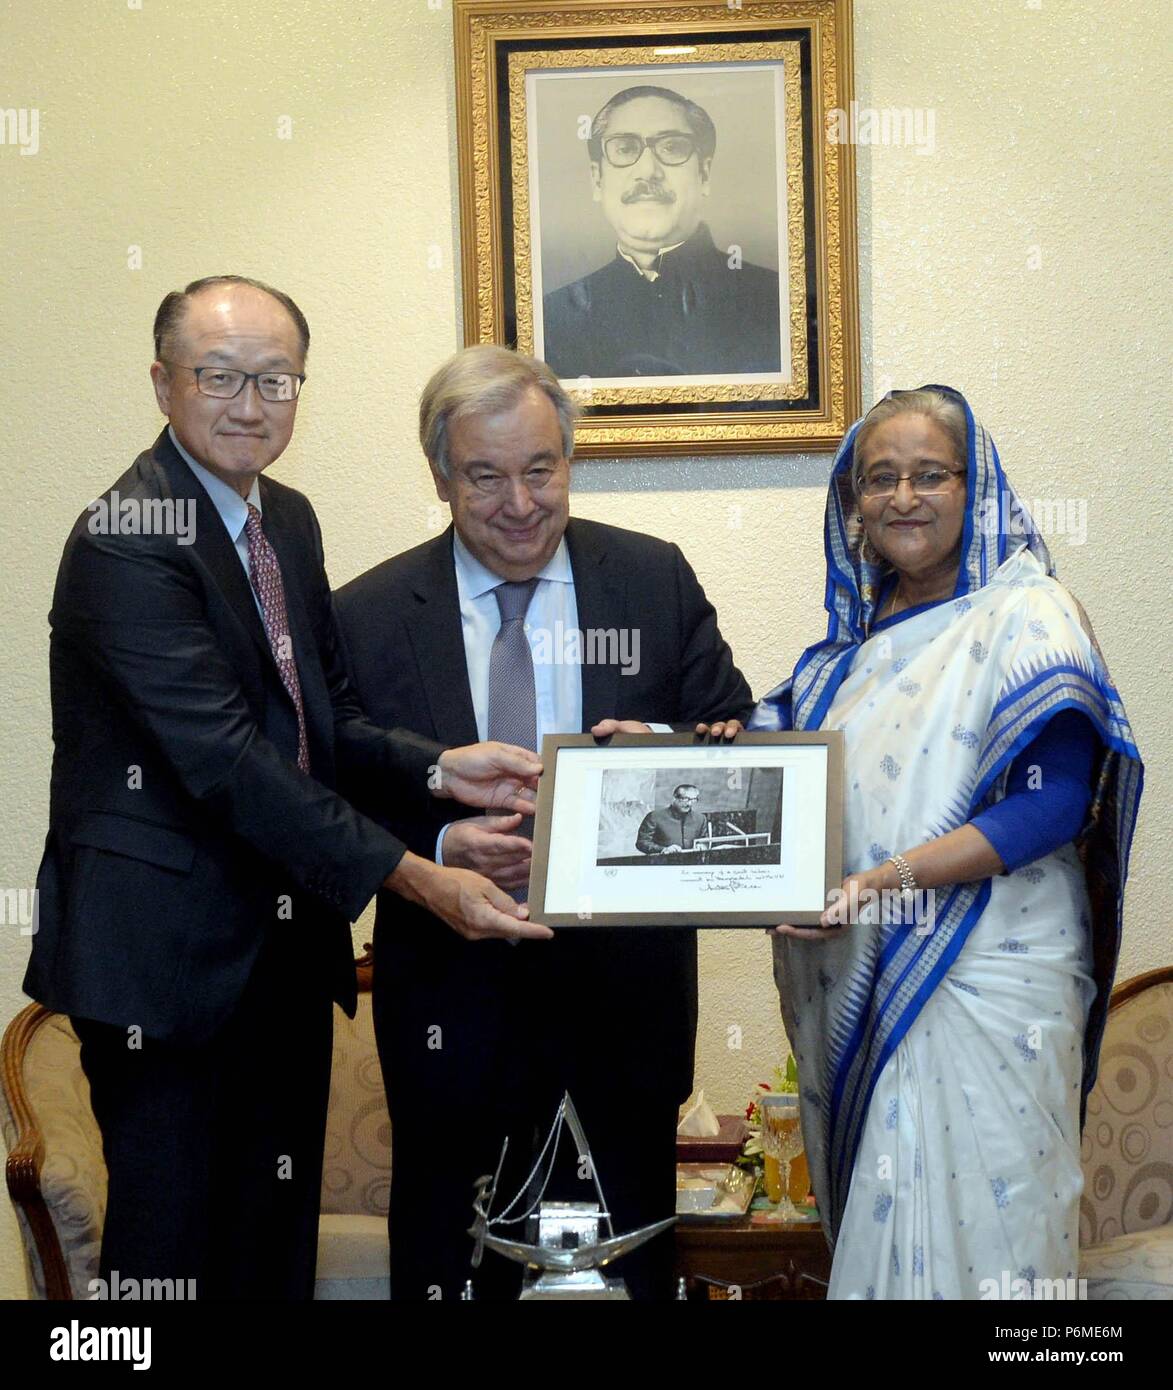 Dhaka. 1st July, 2018. United Nations Secretary-General Antonio Guterres (C) and World Bank President Jim Yong Kim (L) present to Bangladeshi Prime Minister Sheikh Hasina a photo of her father Bangabandhu Sheikh Mujibur Rahman, founding father of Bangladesh, in Dhaka, Bangladesh, on July 1, 2018. U.N. Secretary-General Antonio Guterres arrived here early Sunday in a joint visit with World Bank President Jim Yong Kim to assess the needs for the nearly one million Rohingya refugees driven from their homes in Myanmar. Credit: Xinhua/Alamy Live News Stock Photo